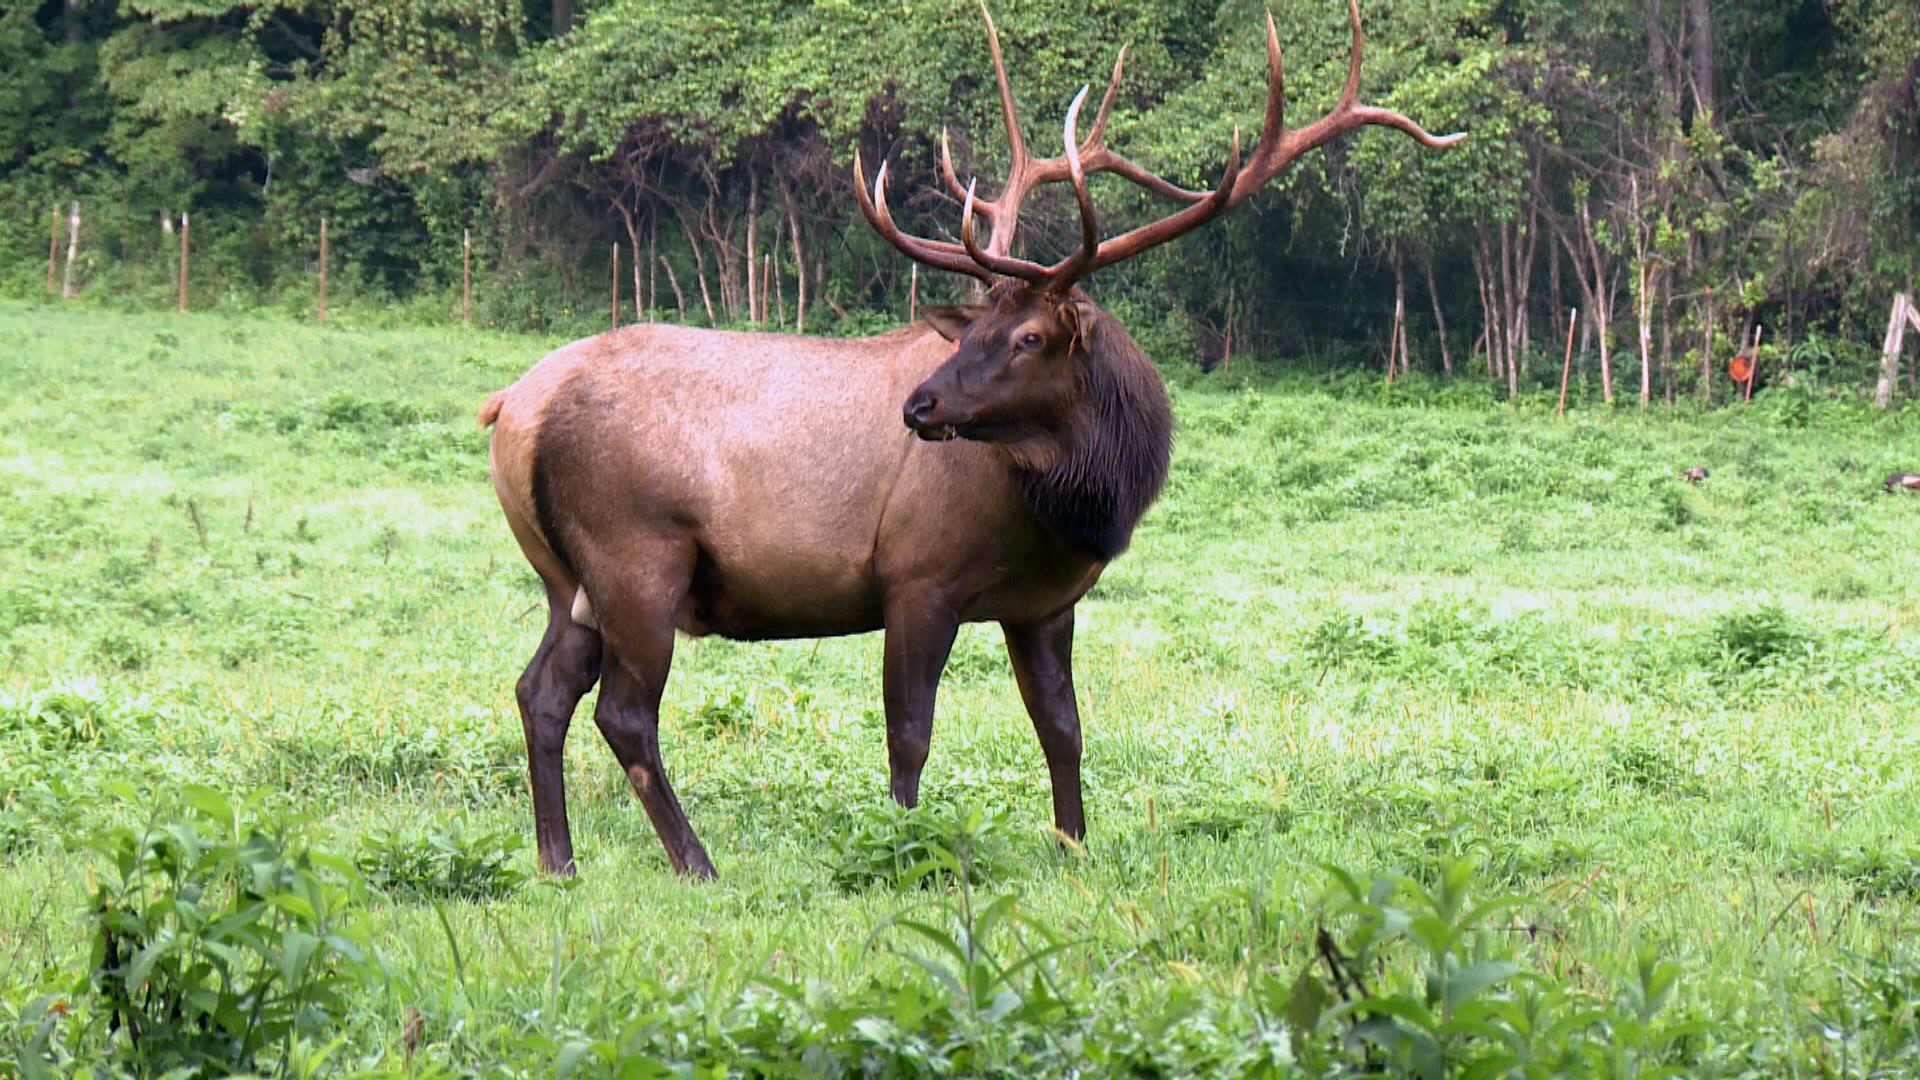 A new festival this weekend helps the resurgent Elk in the Great Smoky Mountains.